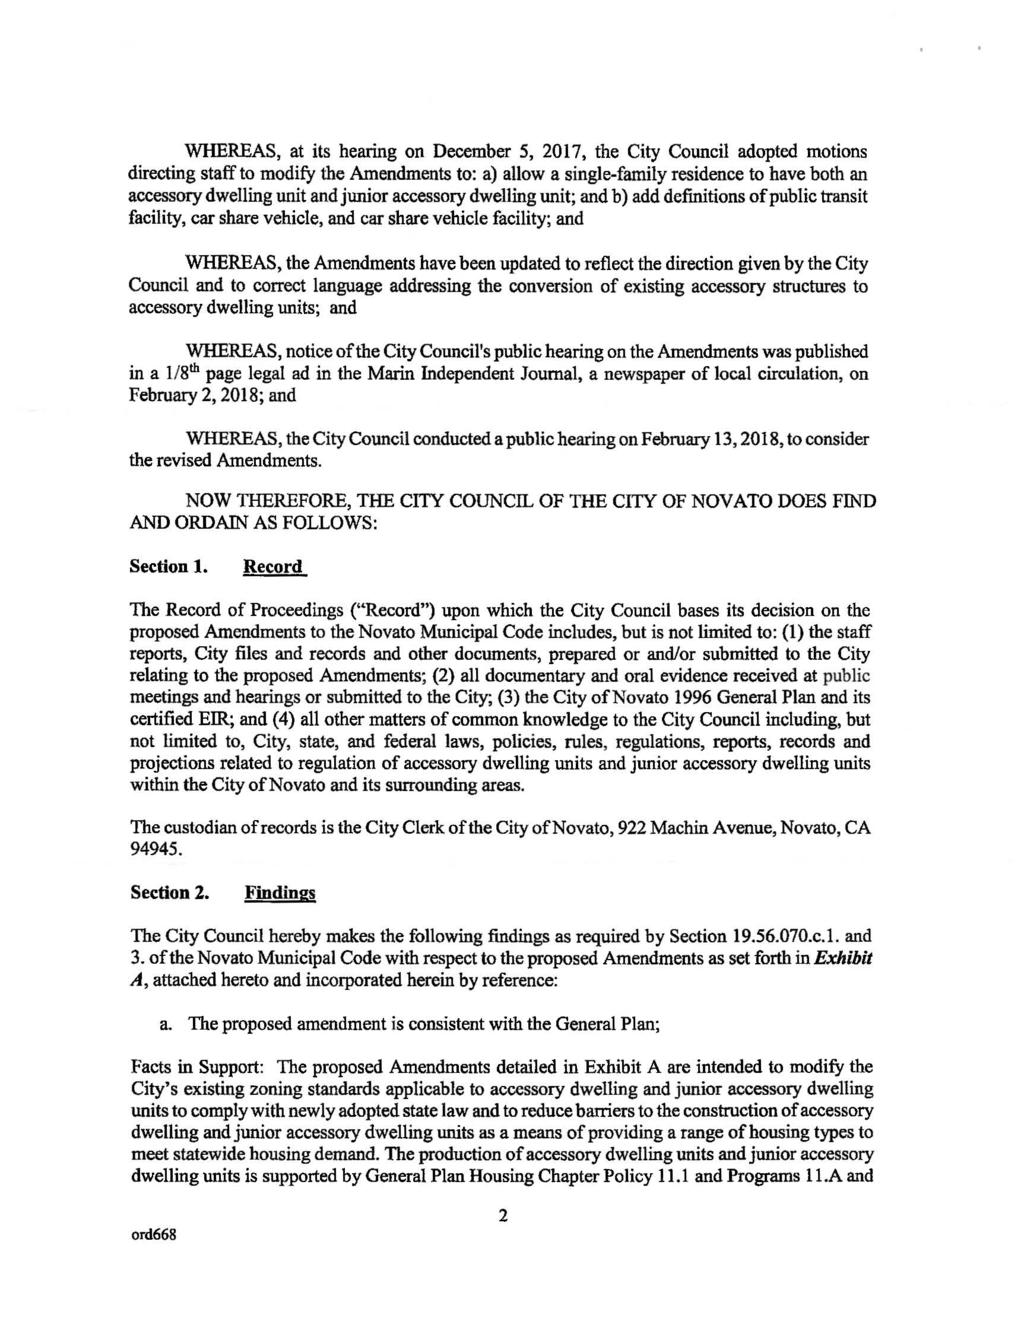 WHEREAS, at its hearing on December 5, 2017, the City Council adopted motions directing staff to modify the Amendments to: a) allow a single-family residence to have both an accessory dwelling unit